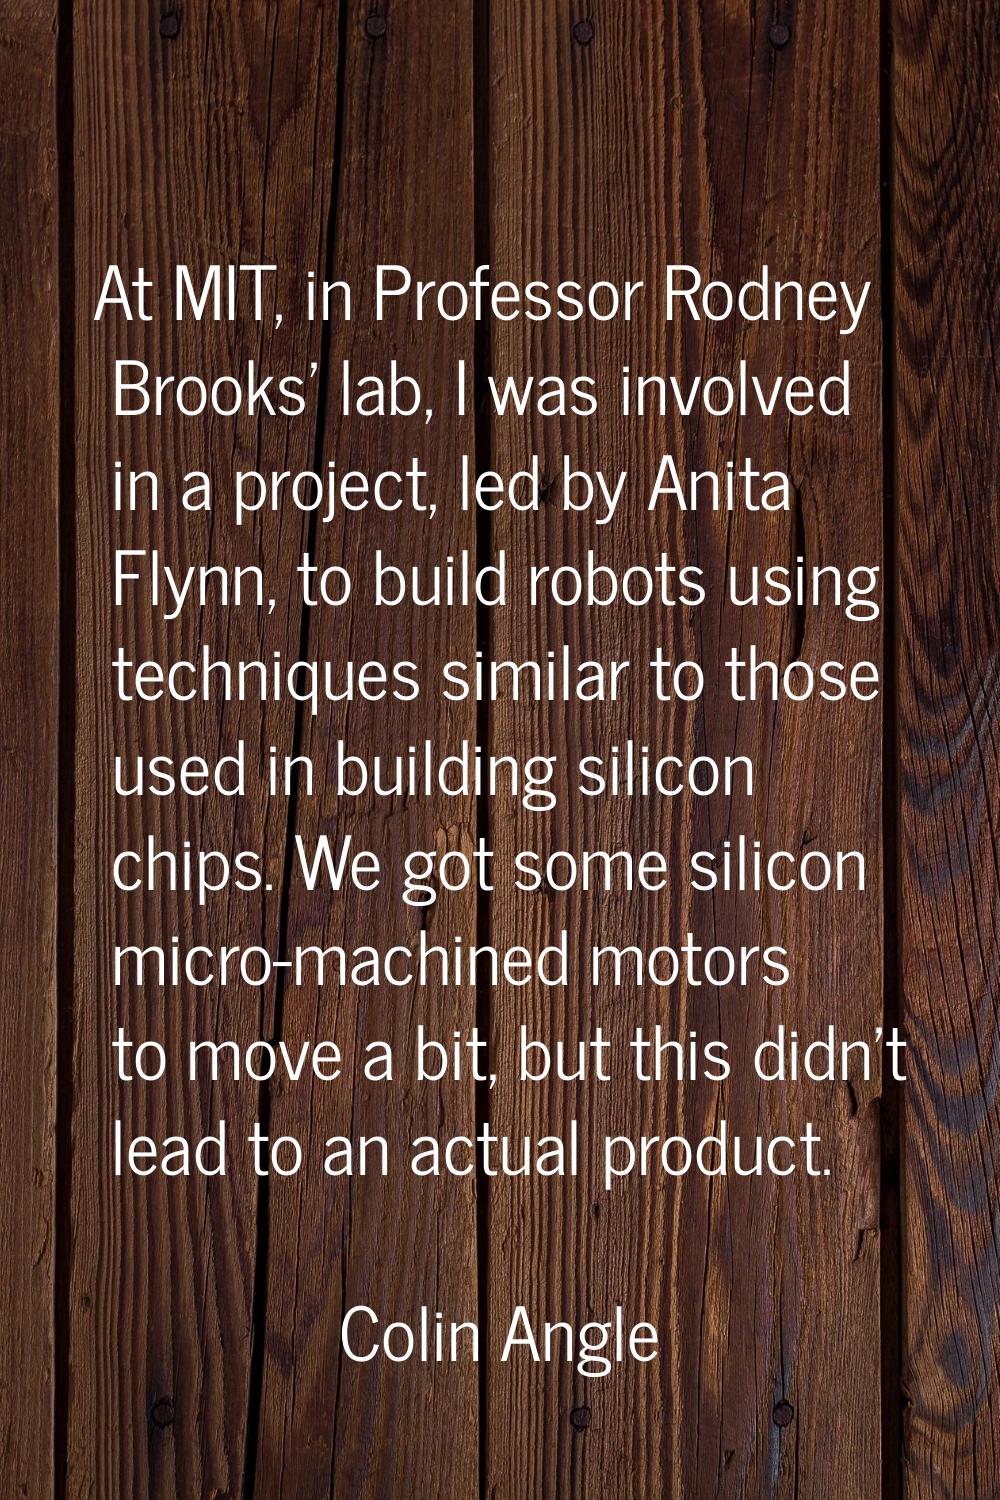 At MIT, in Professor Rodney Brooks' lab, I was involved in a project, led by Anita Flynn, to build 